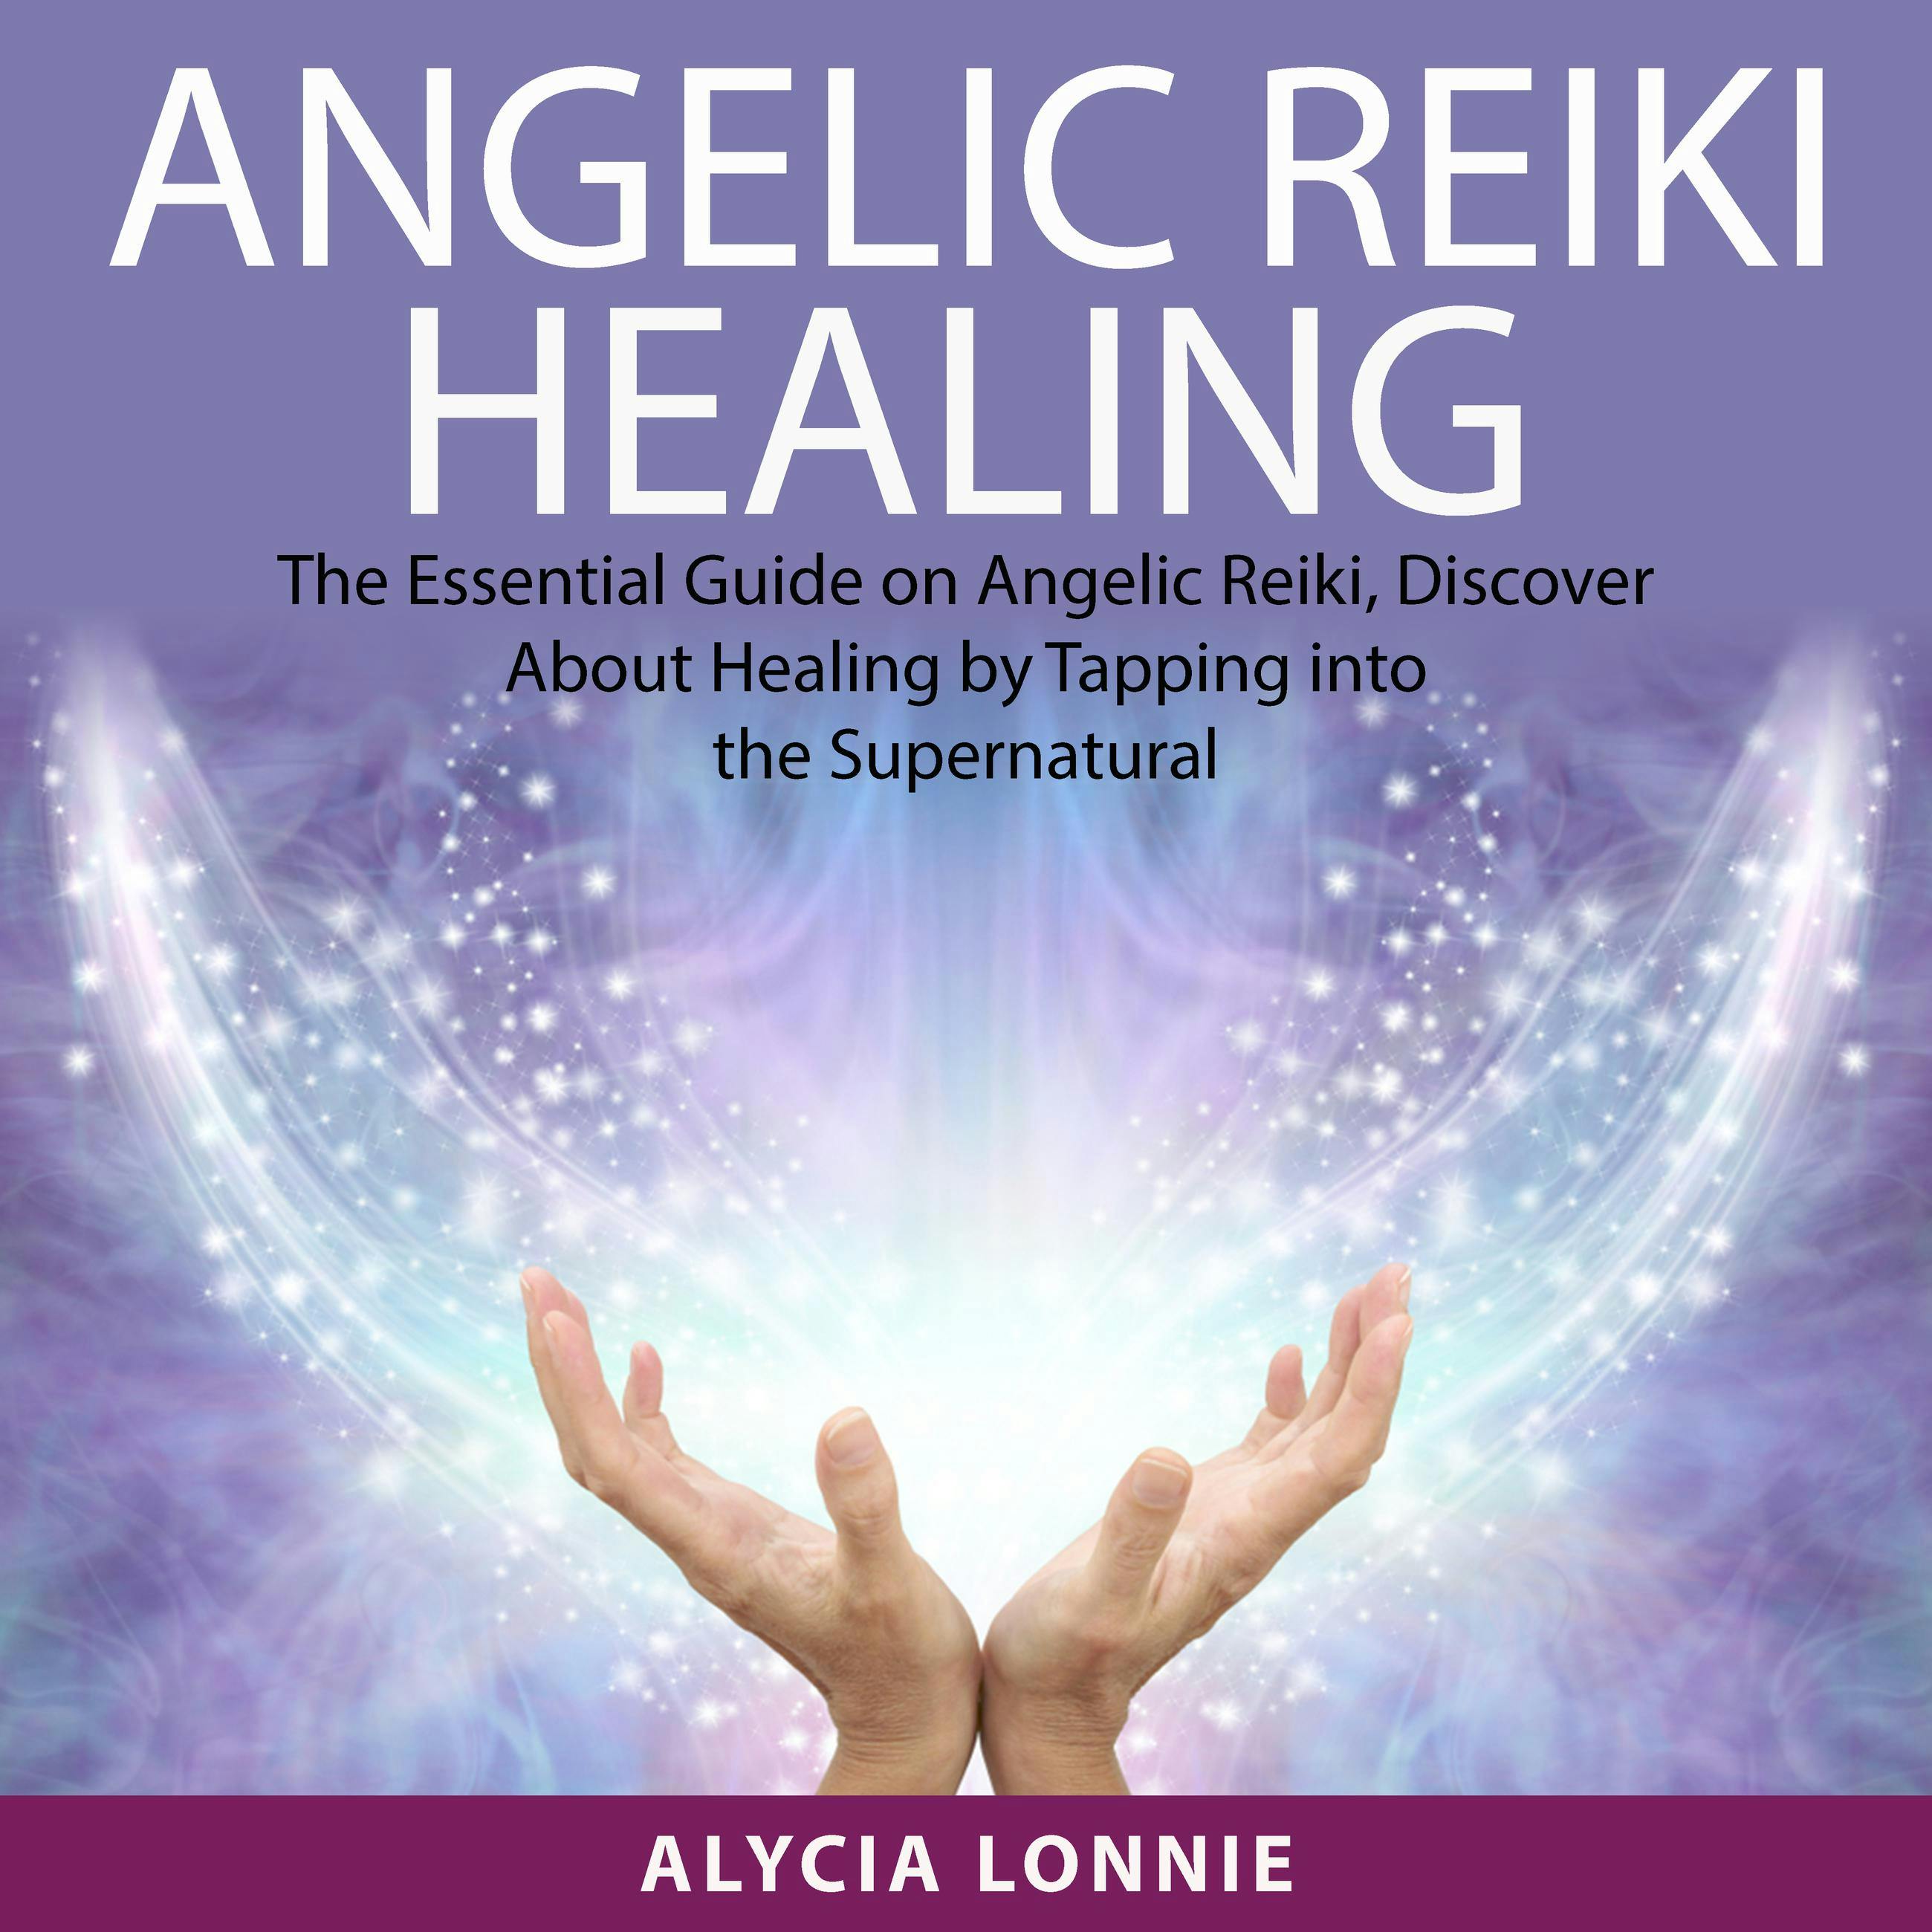 Angelic Reiki Healing: The Essential Guide on Angelic Reiki, Discover About Healing by Tapping into the Supernatural - Alycia Lonnie